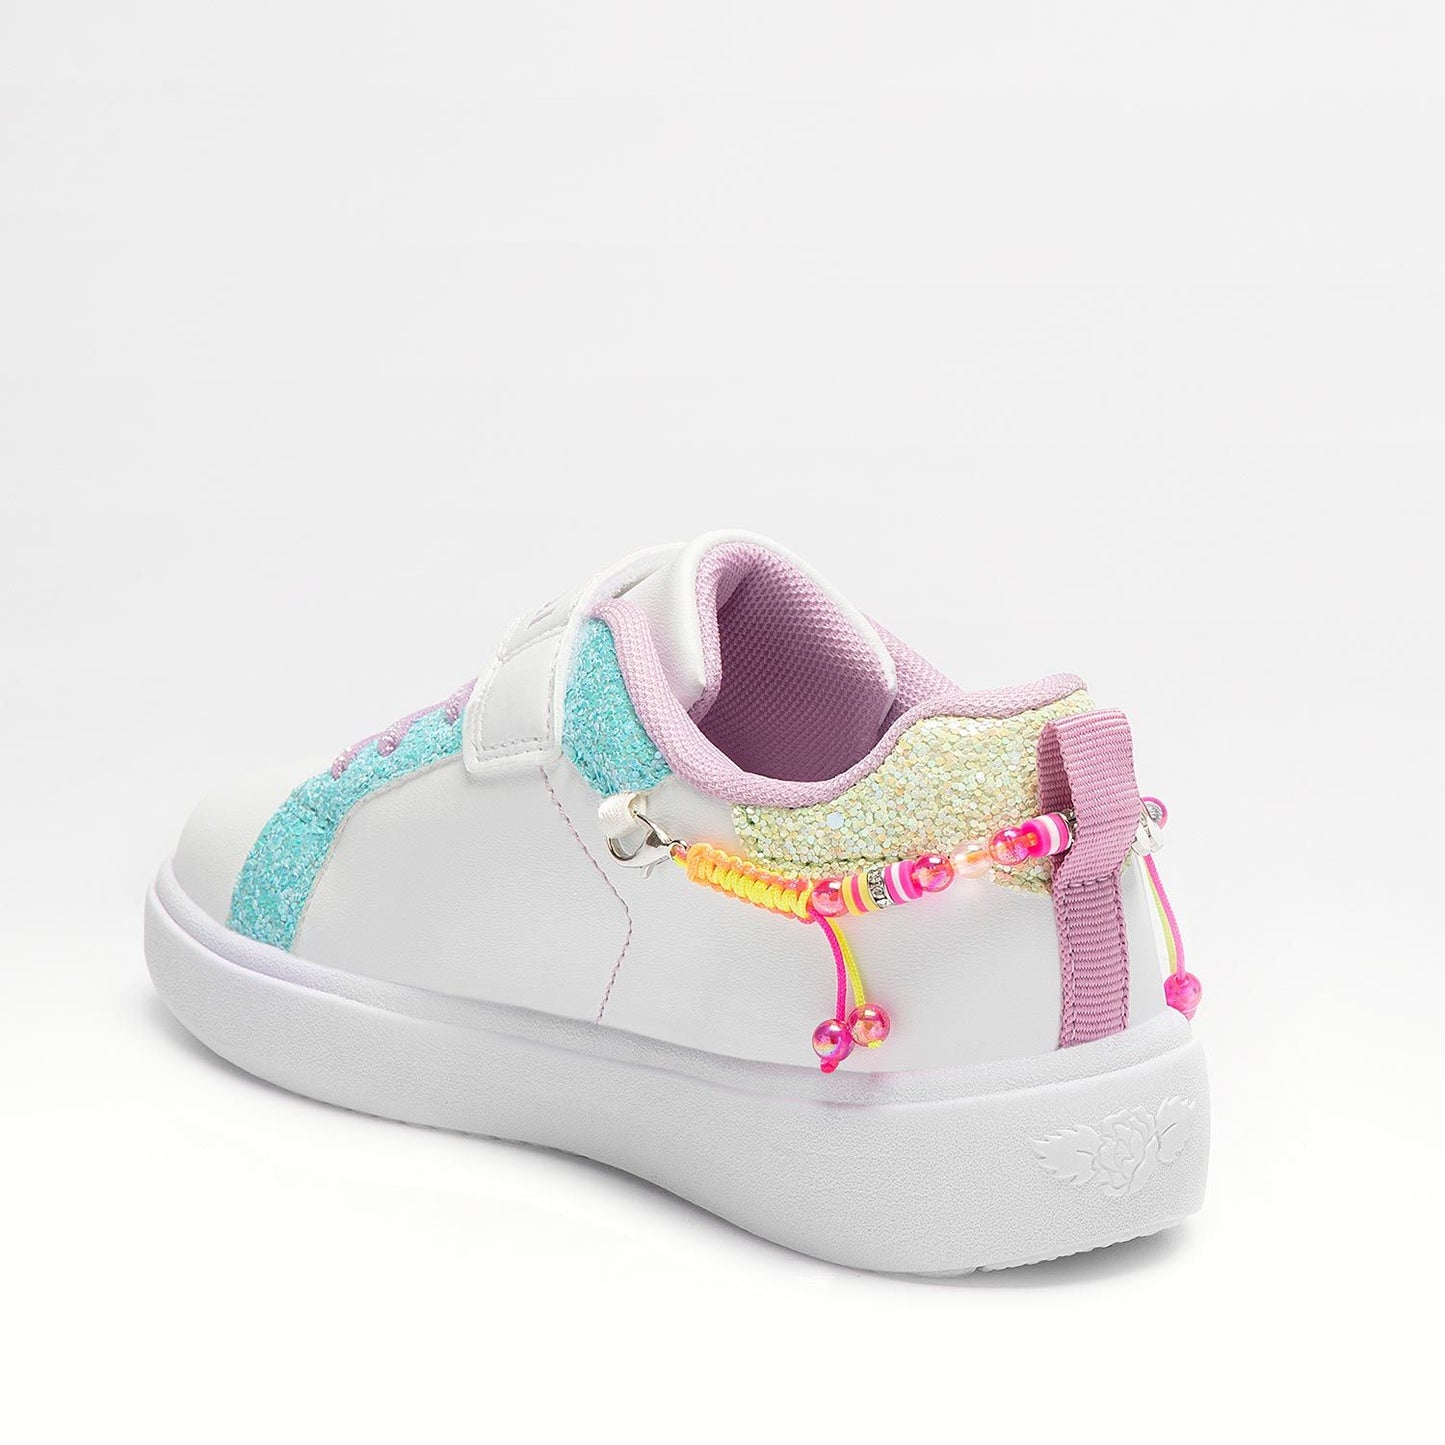 A casual girls shoe by Lelli Kelly, style LK3410 Gioiello in white multi leather with Velcro fastening. Angled view.